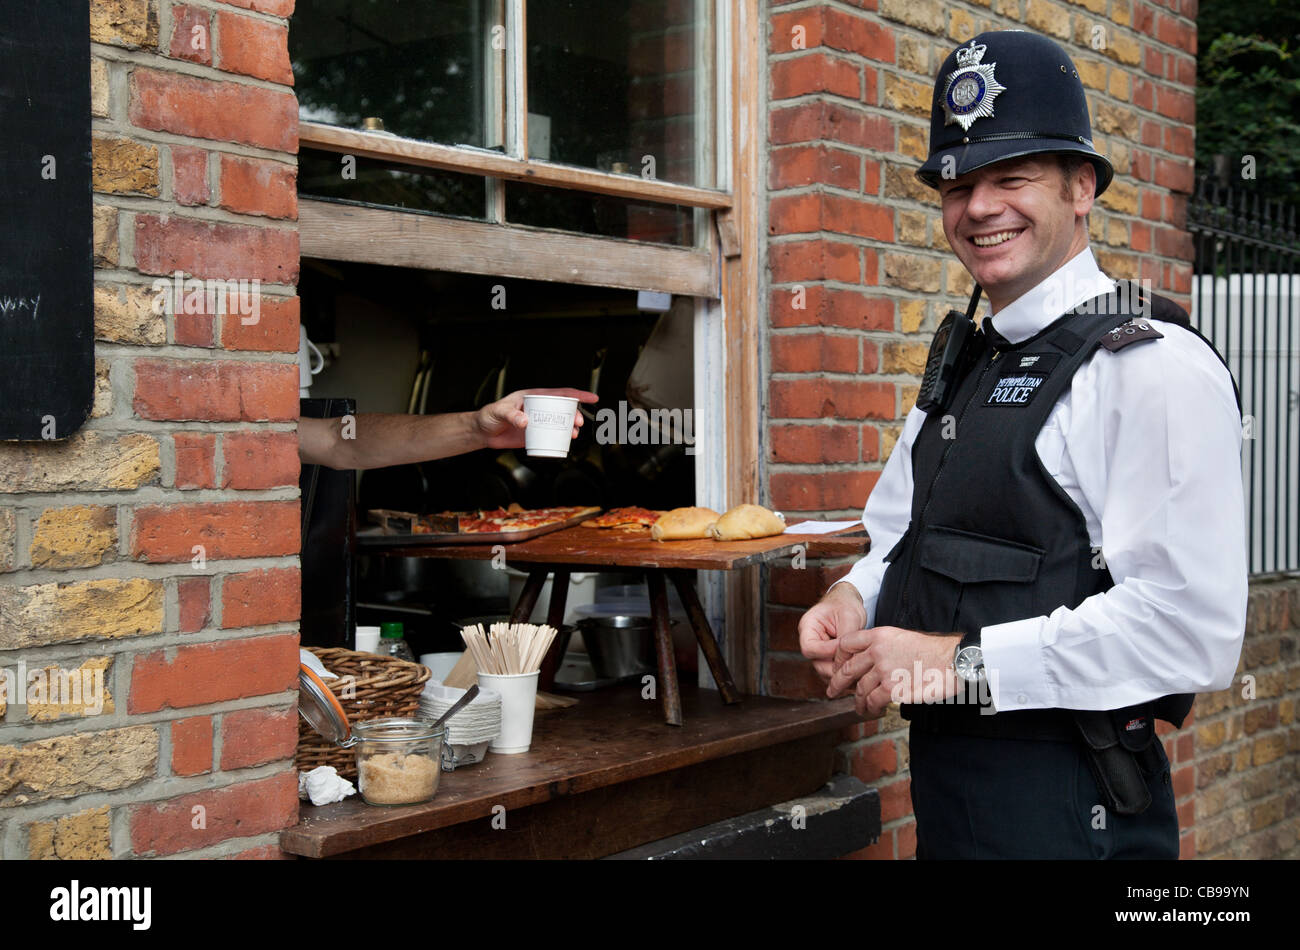 A friendly policeman 'Bobby' at lunchtime, Columbia Market, London, UK Stock Photo